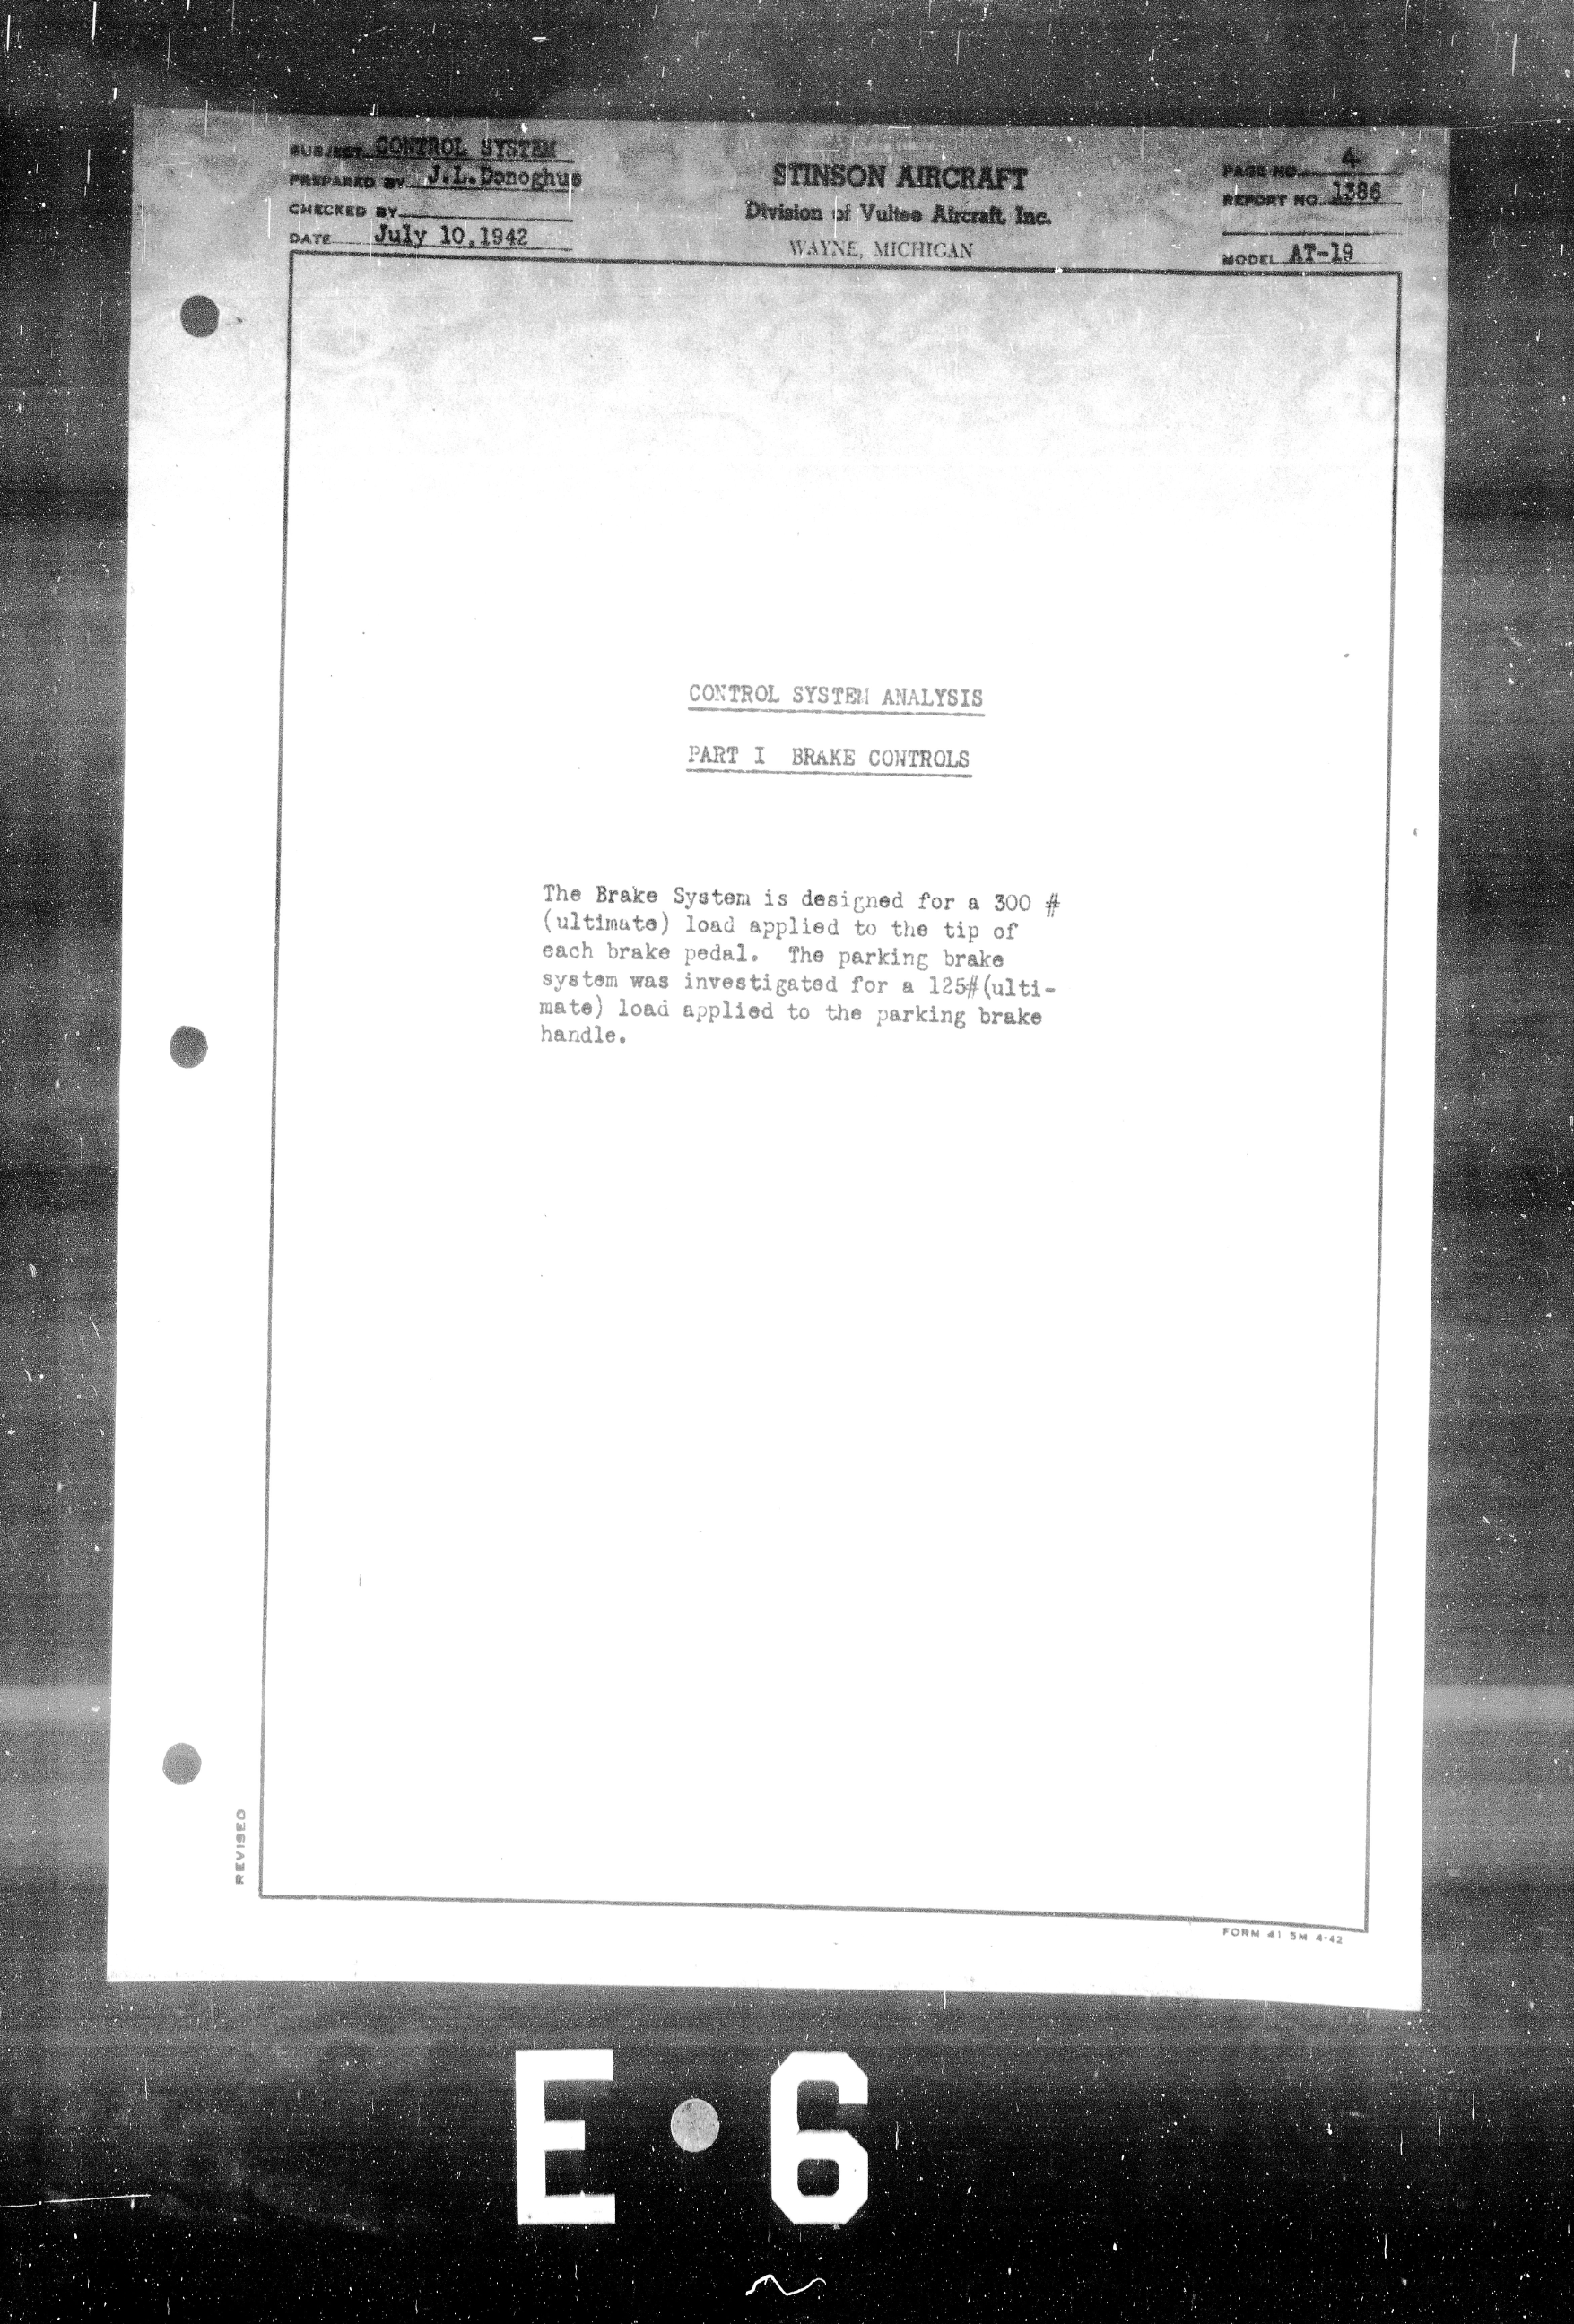 Sample page 5 from AirCorps Library document: Control System Analysis for Model AT-19 